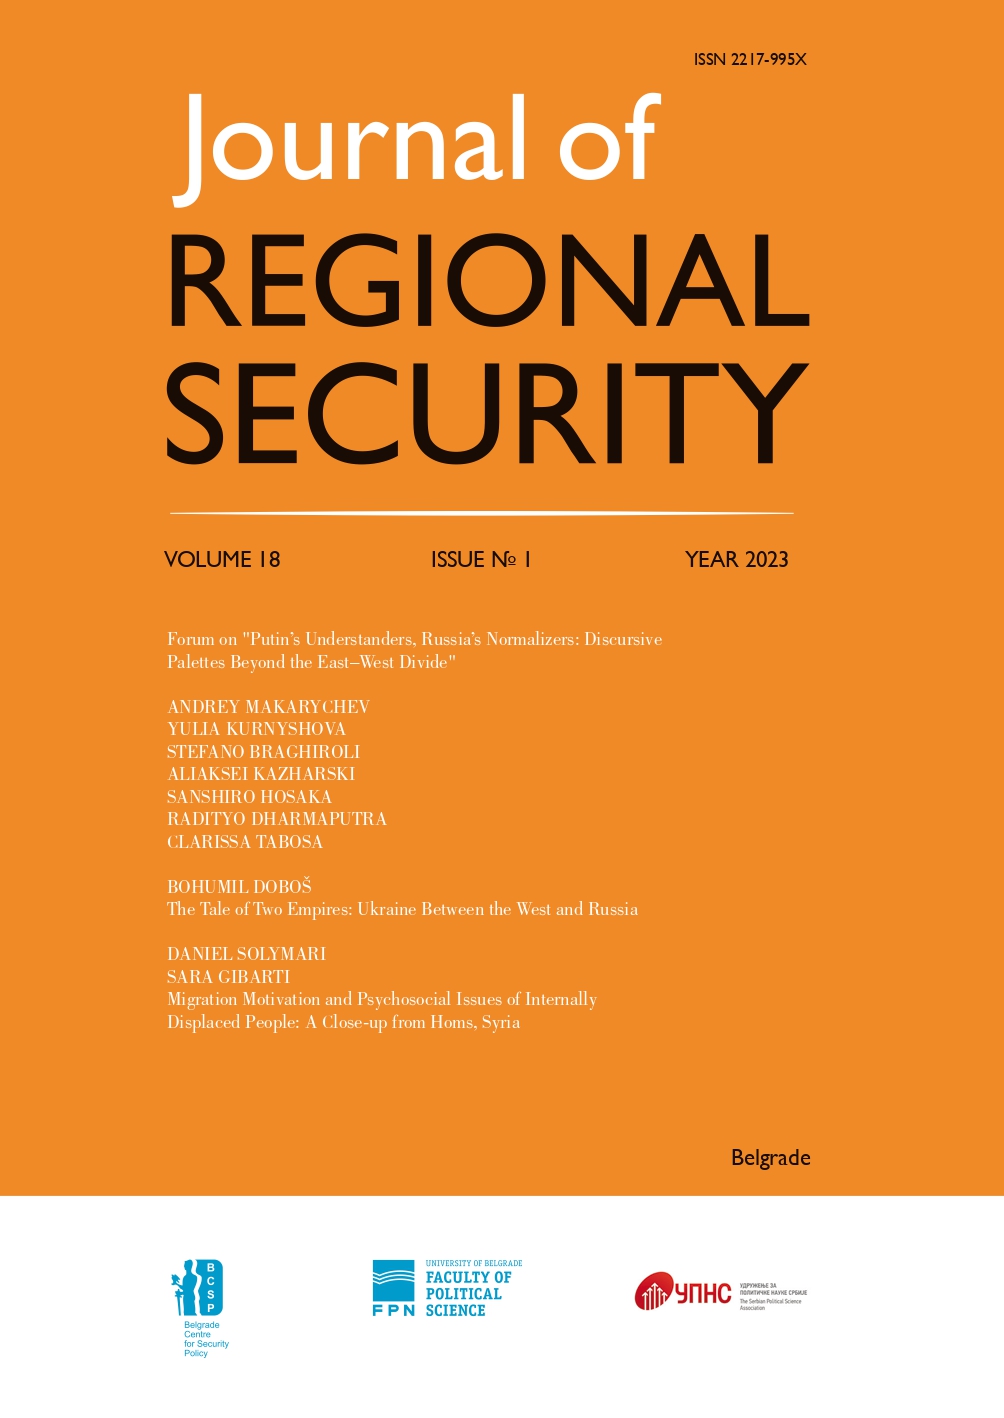 Migration Motivation and Psychosocial Issues of Internally Displaced People: A Close-up from Homs, Syria Cover Image